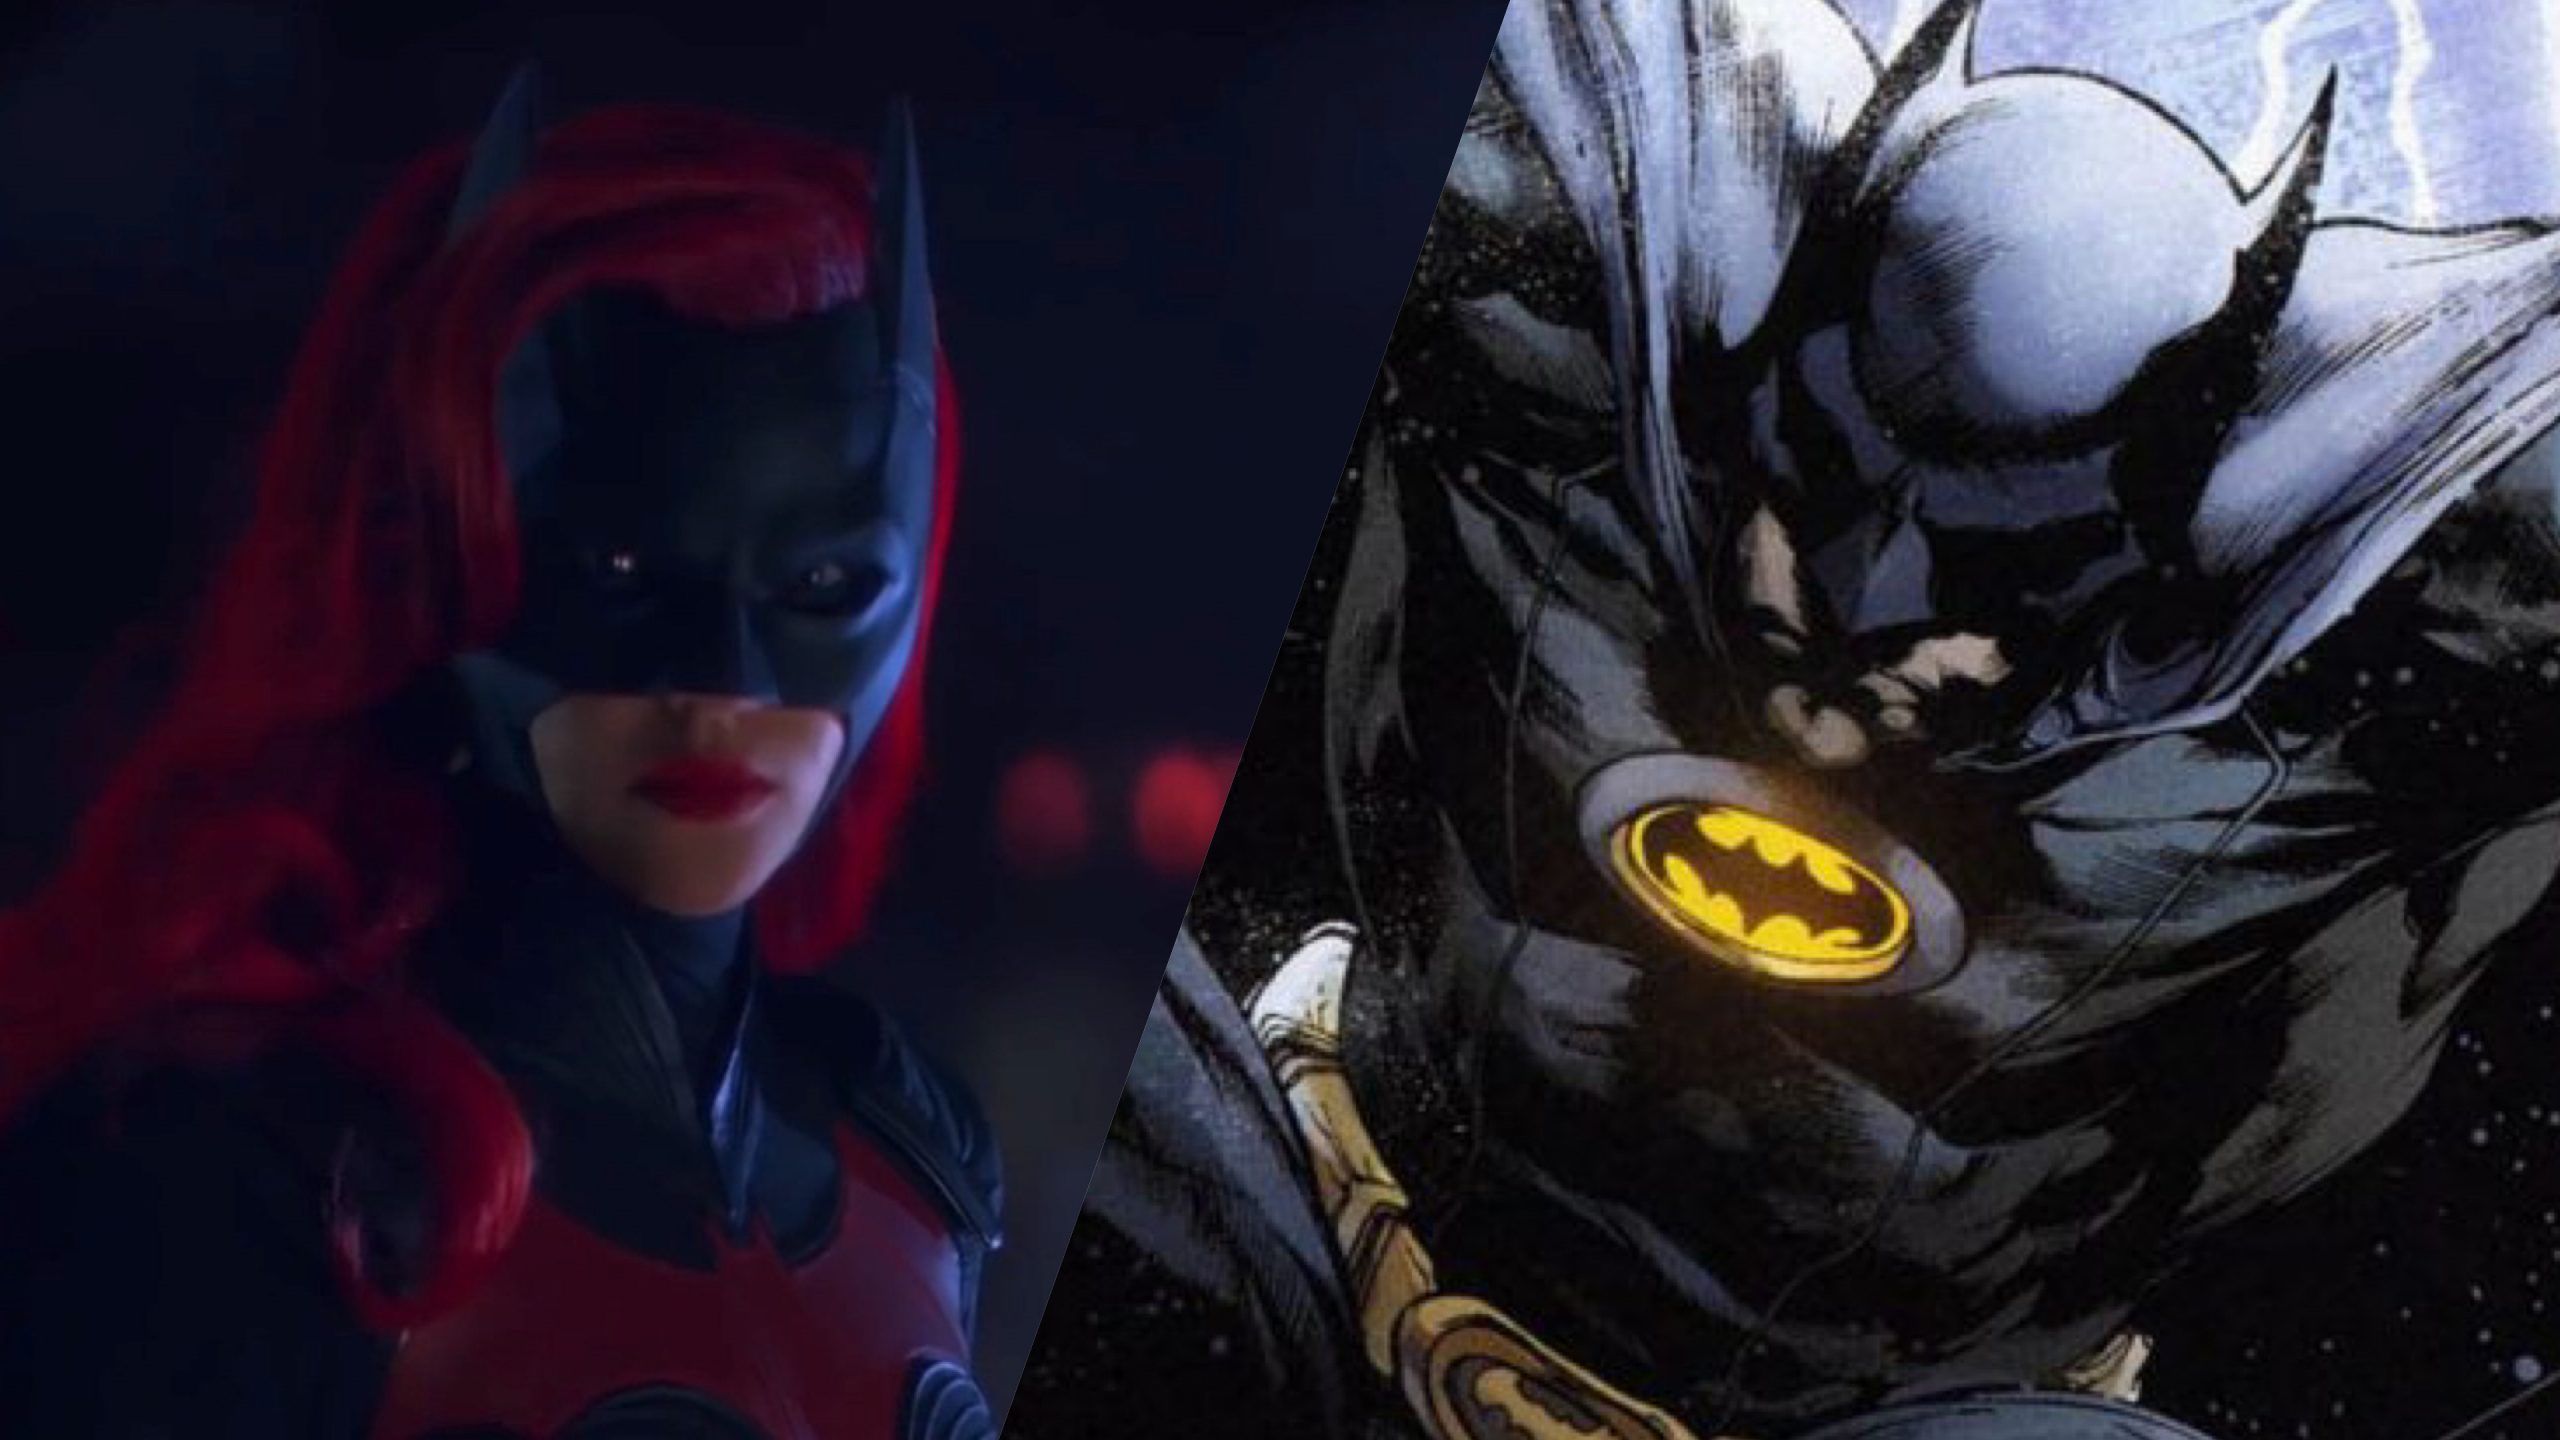 Batwoman” Writers Haven't Established Where Batman Has Gone, Says  Showrunner – The Cultured Nerd